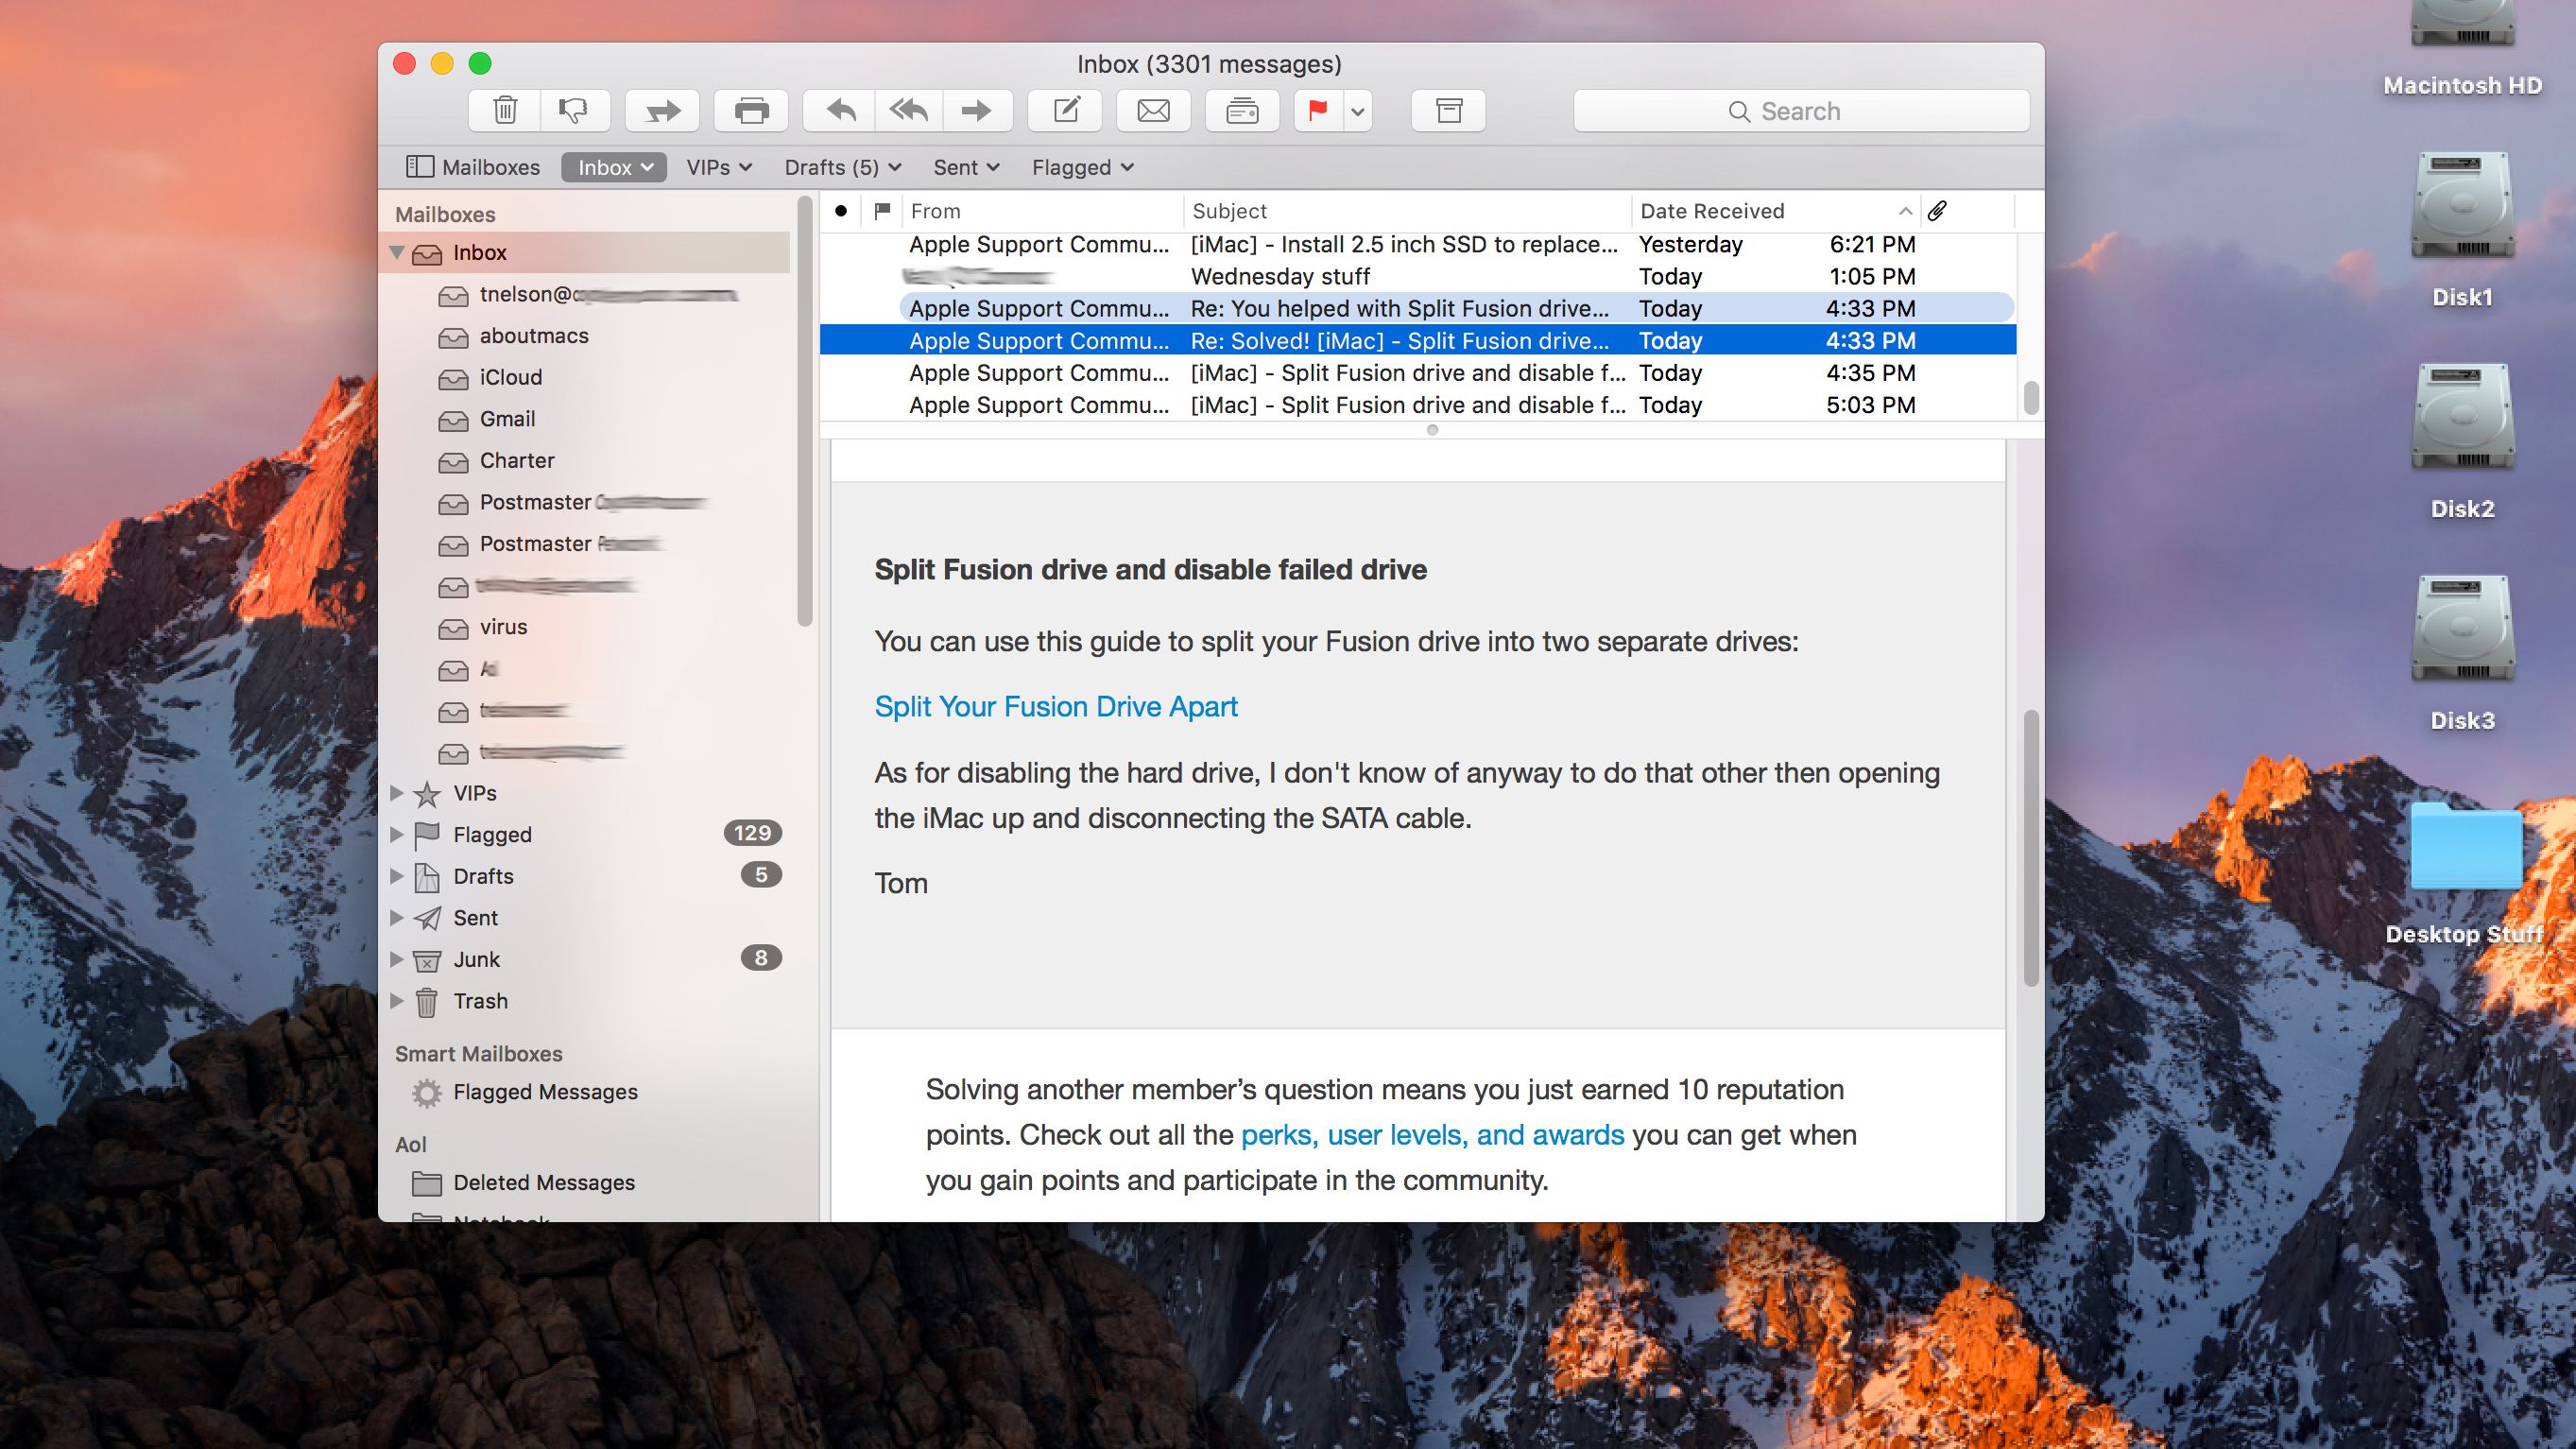 Mac mail app encrypted message subject